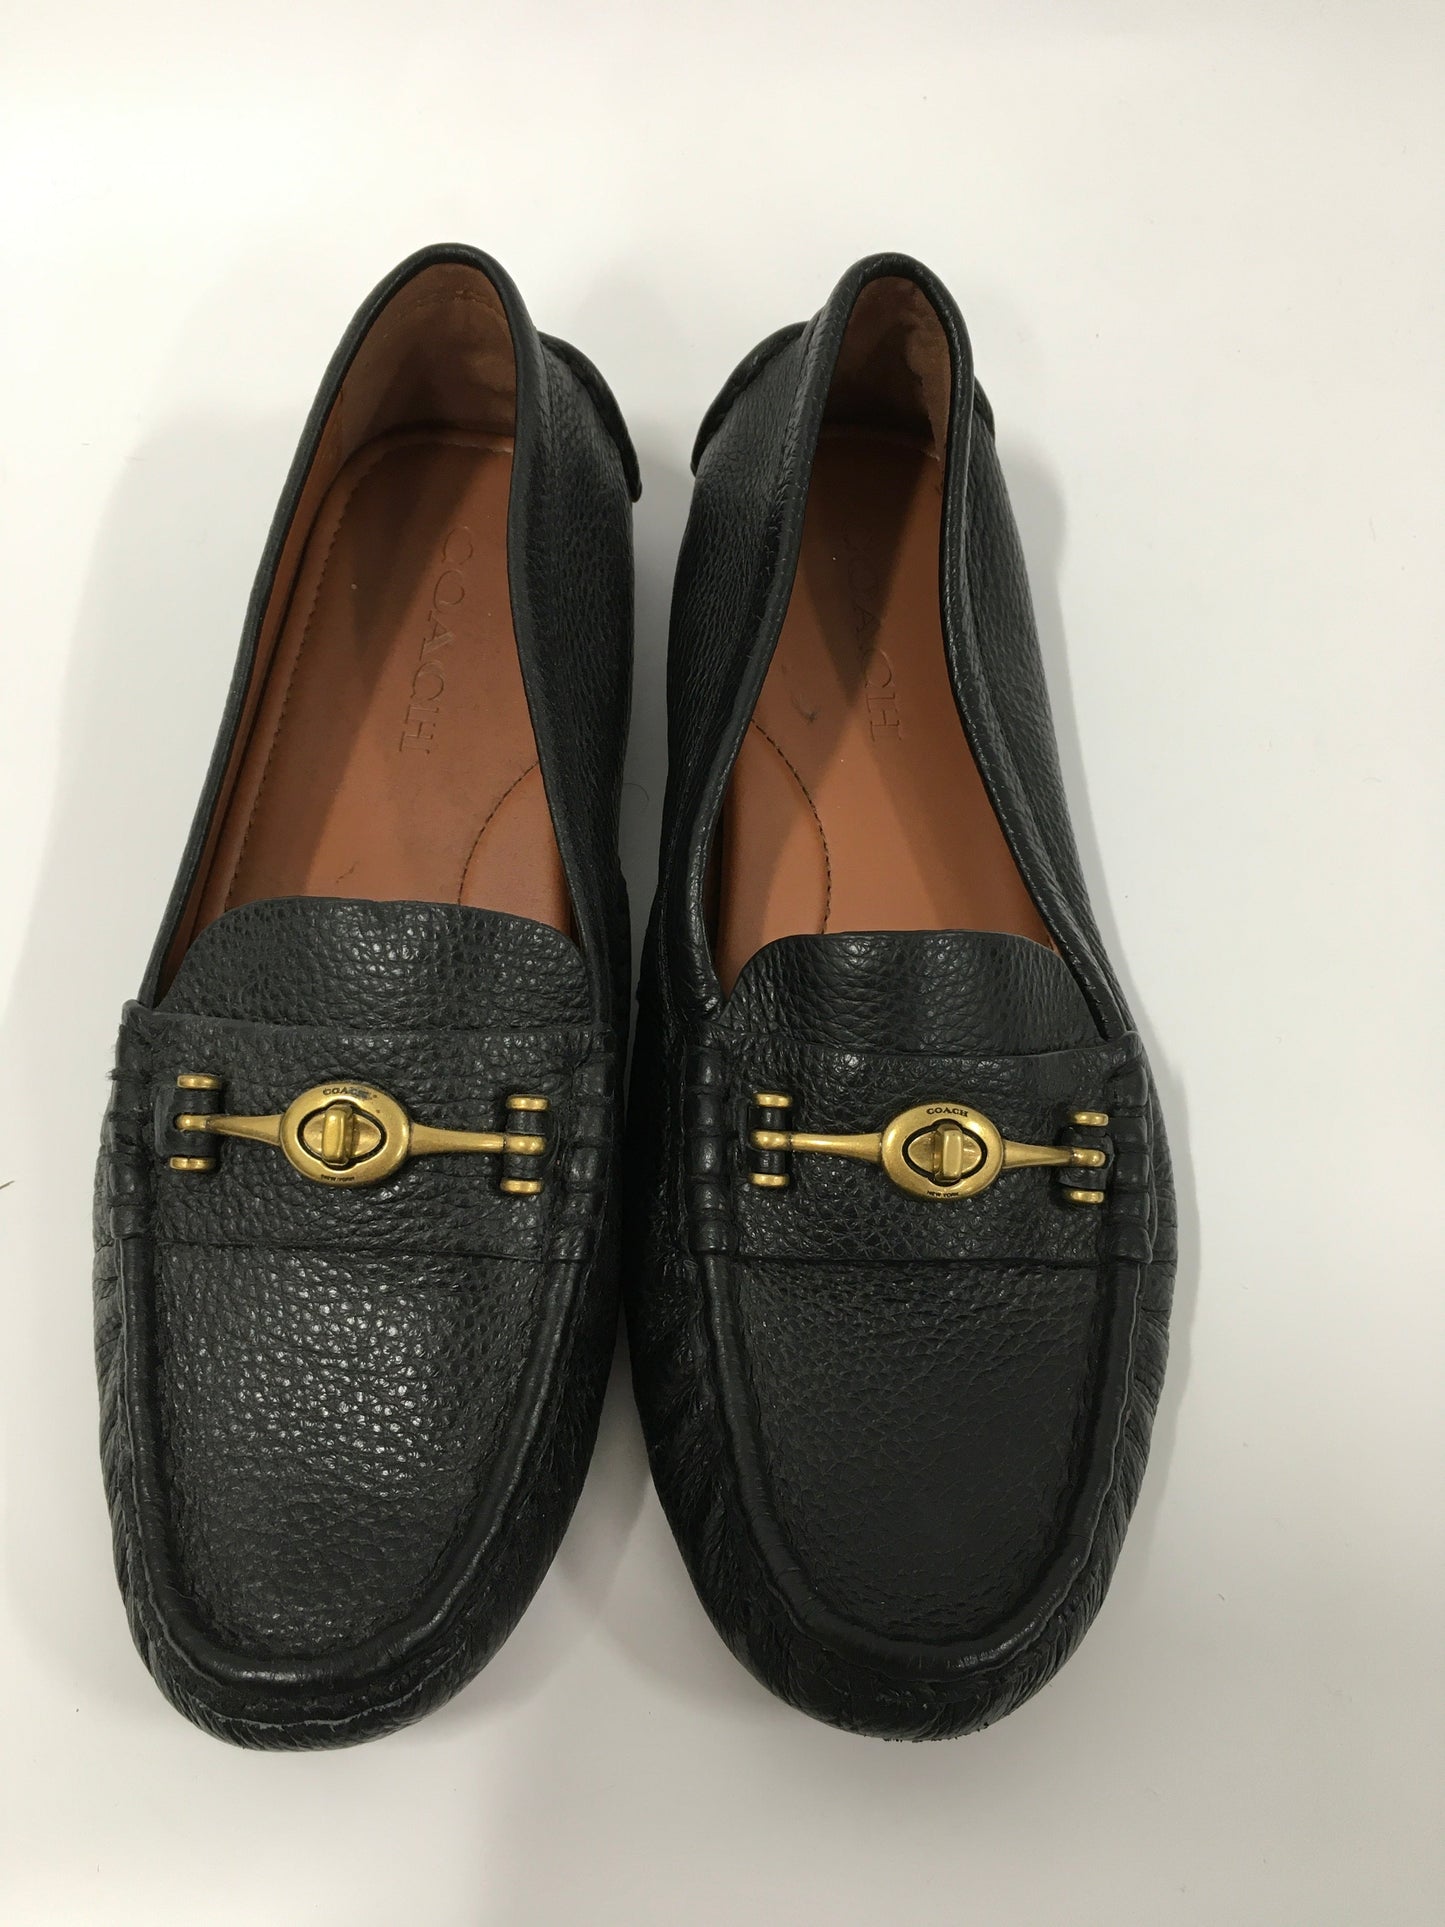 Black Shoes Flats Loafer Oxford Coach, Size 8.5